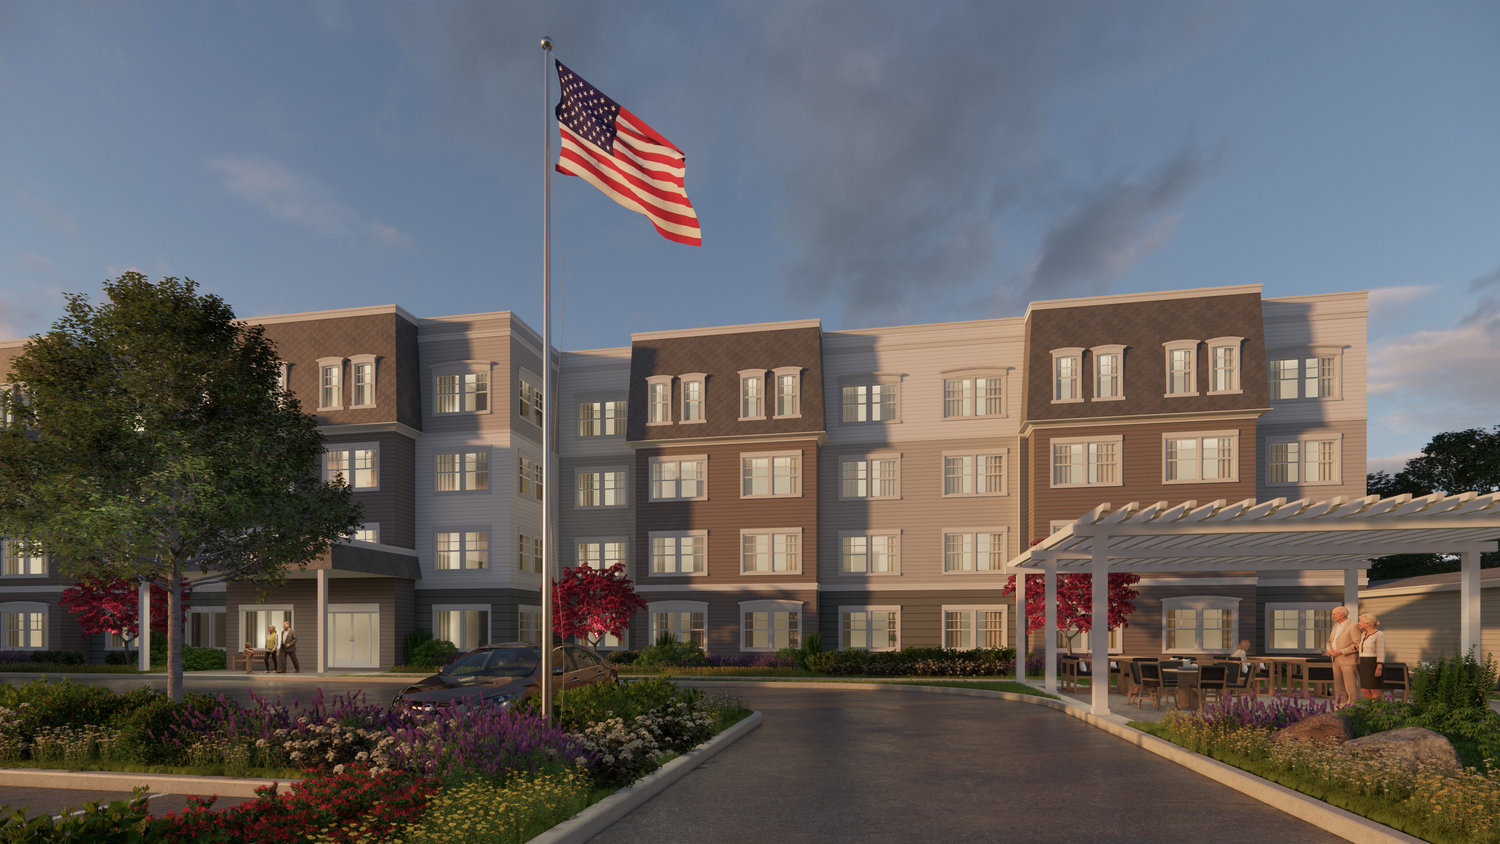 The Dogwood Terrace apartment complex will soon be knocked down and rebuilt into a modern facility.